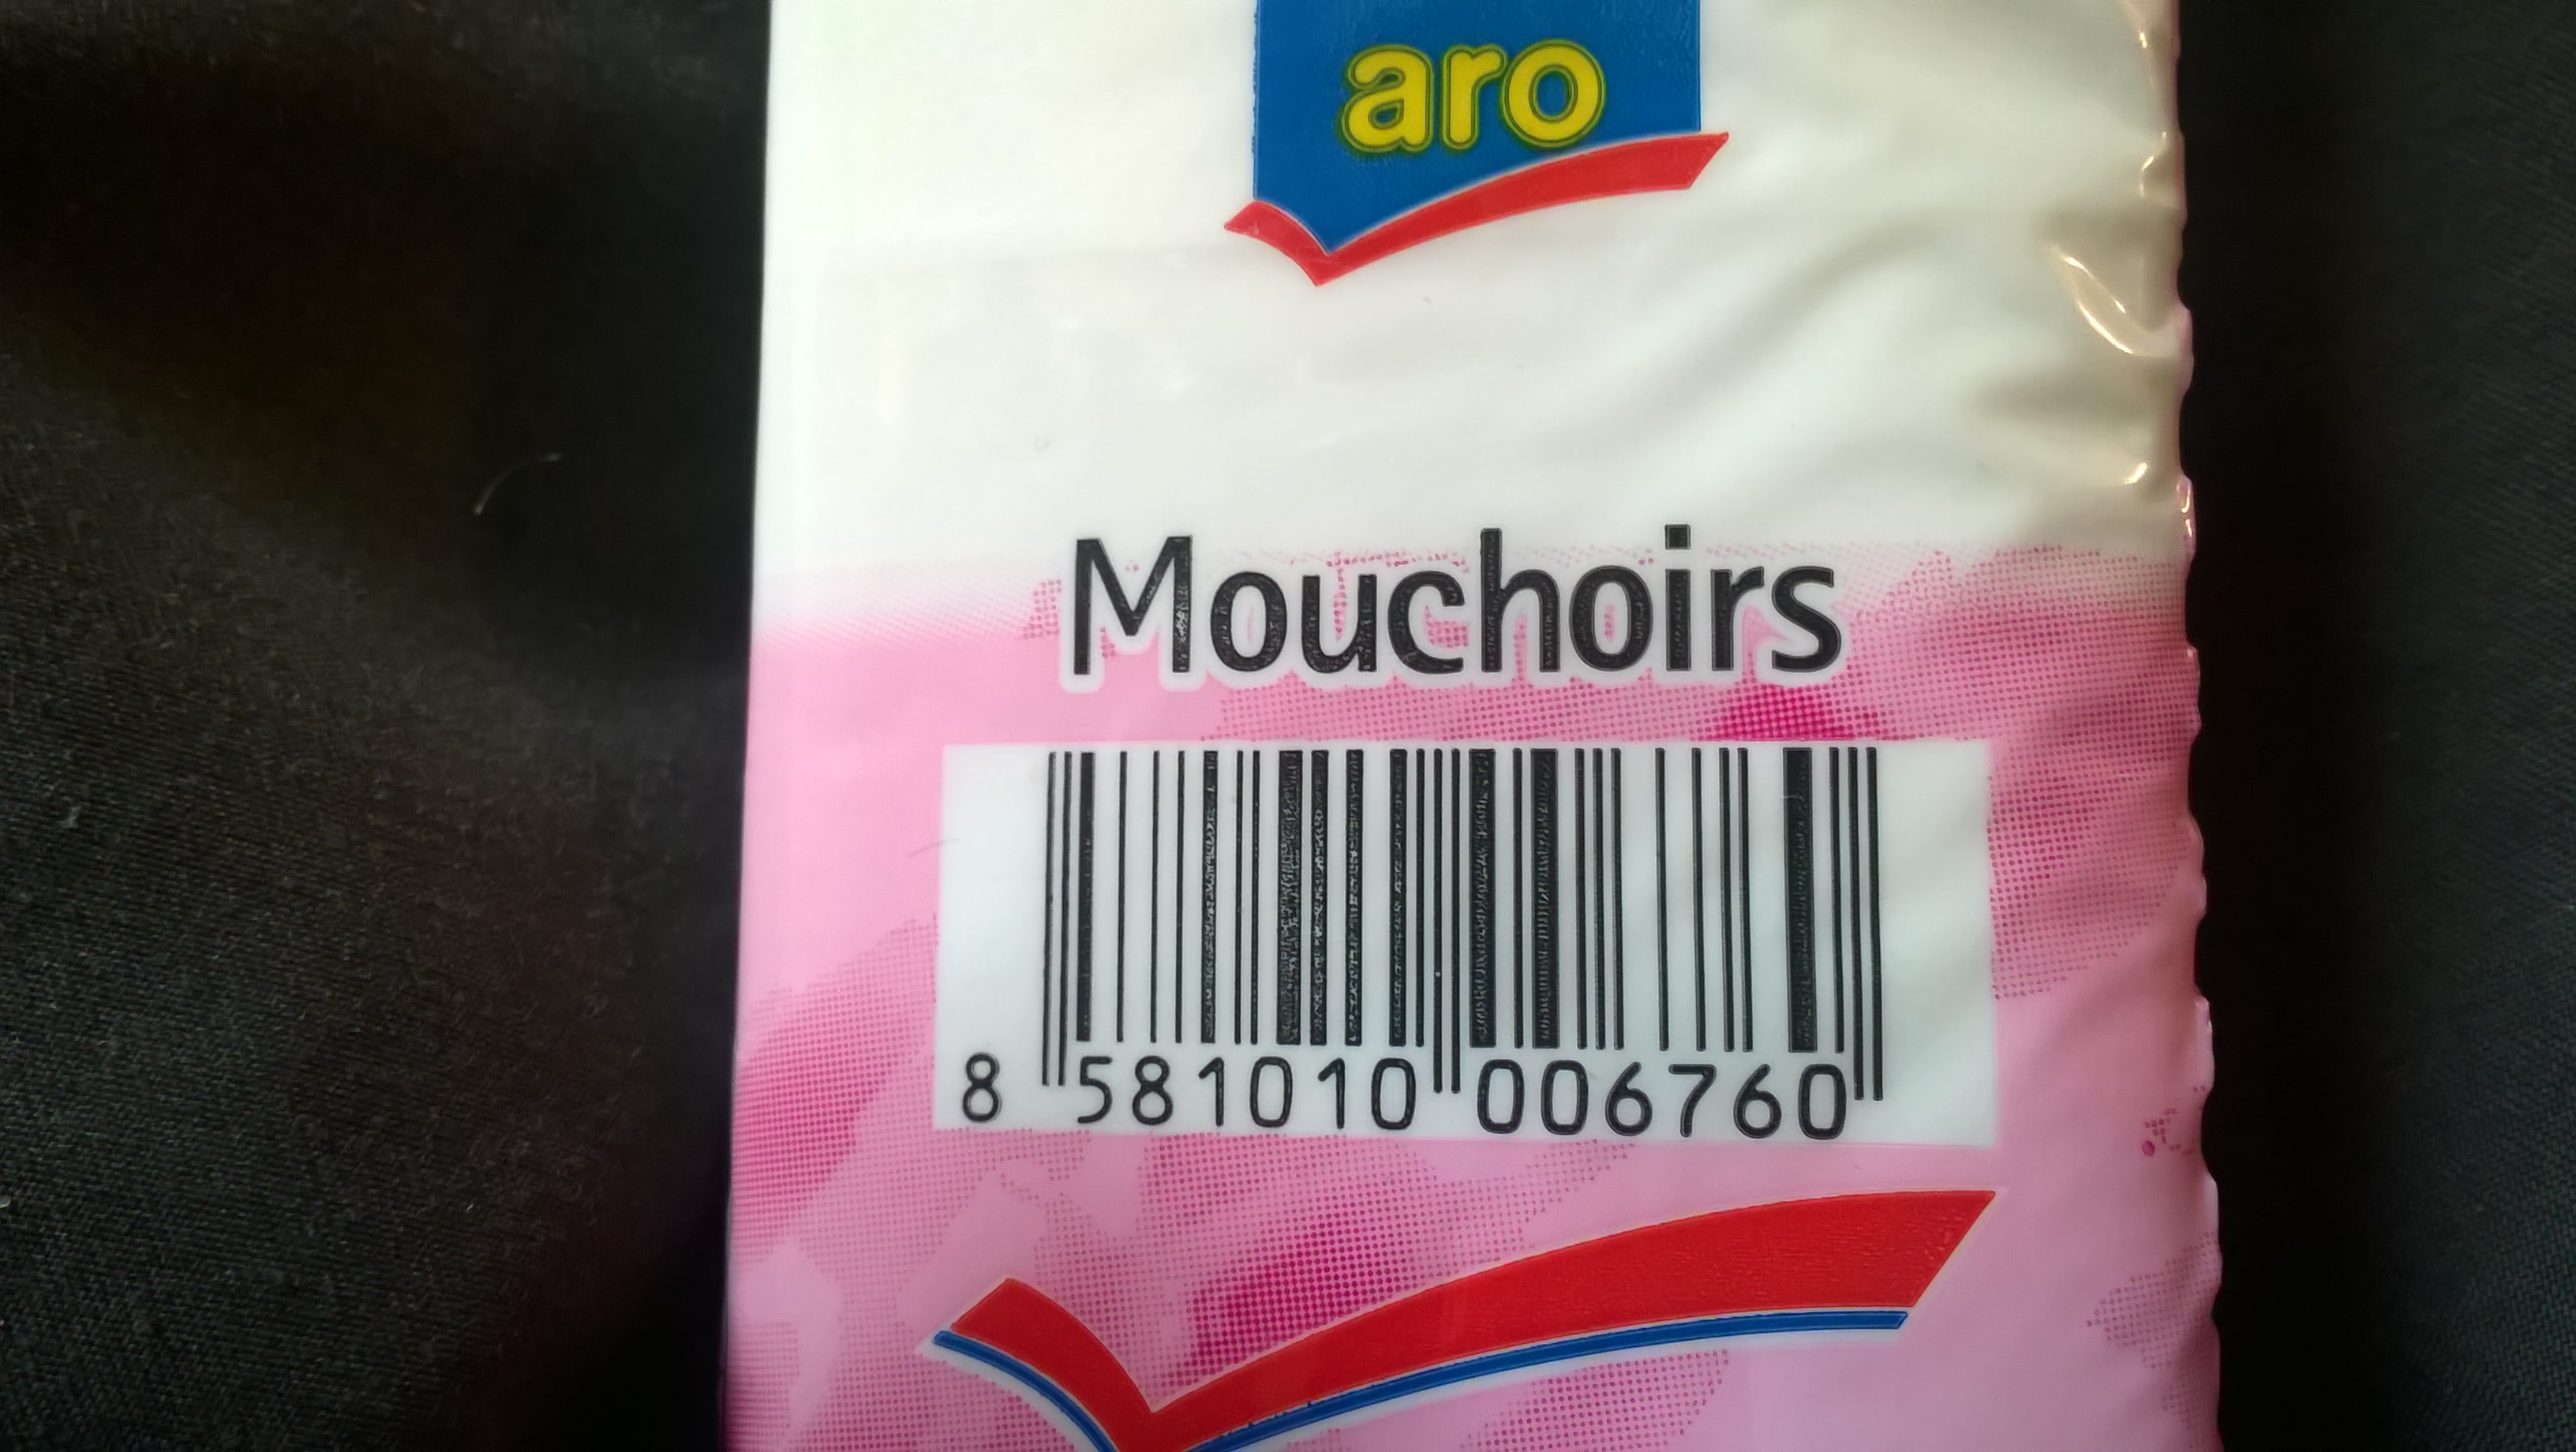 Mouchoirs - Tuote - fr